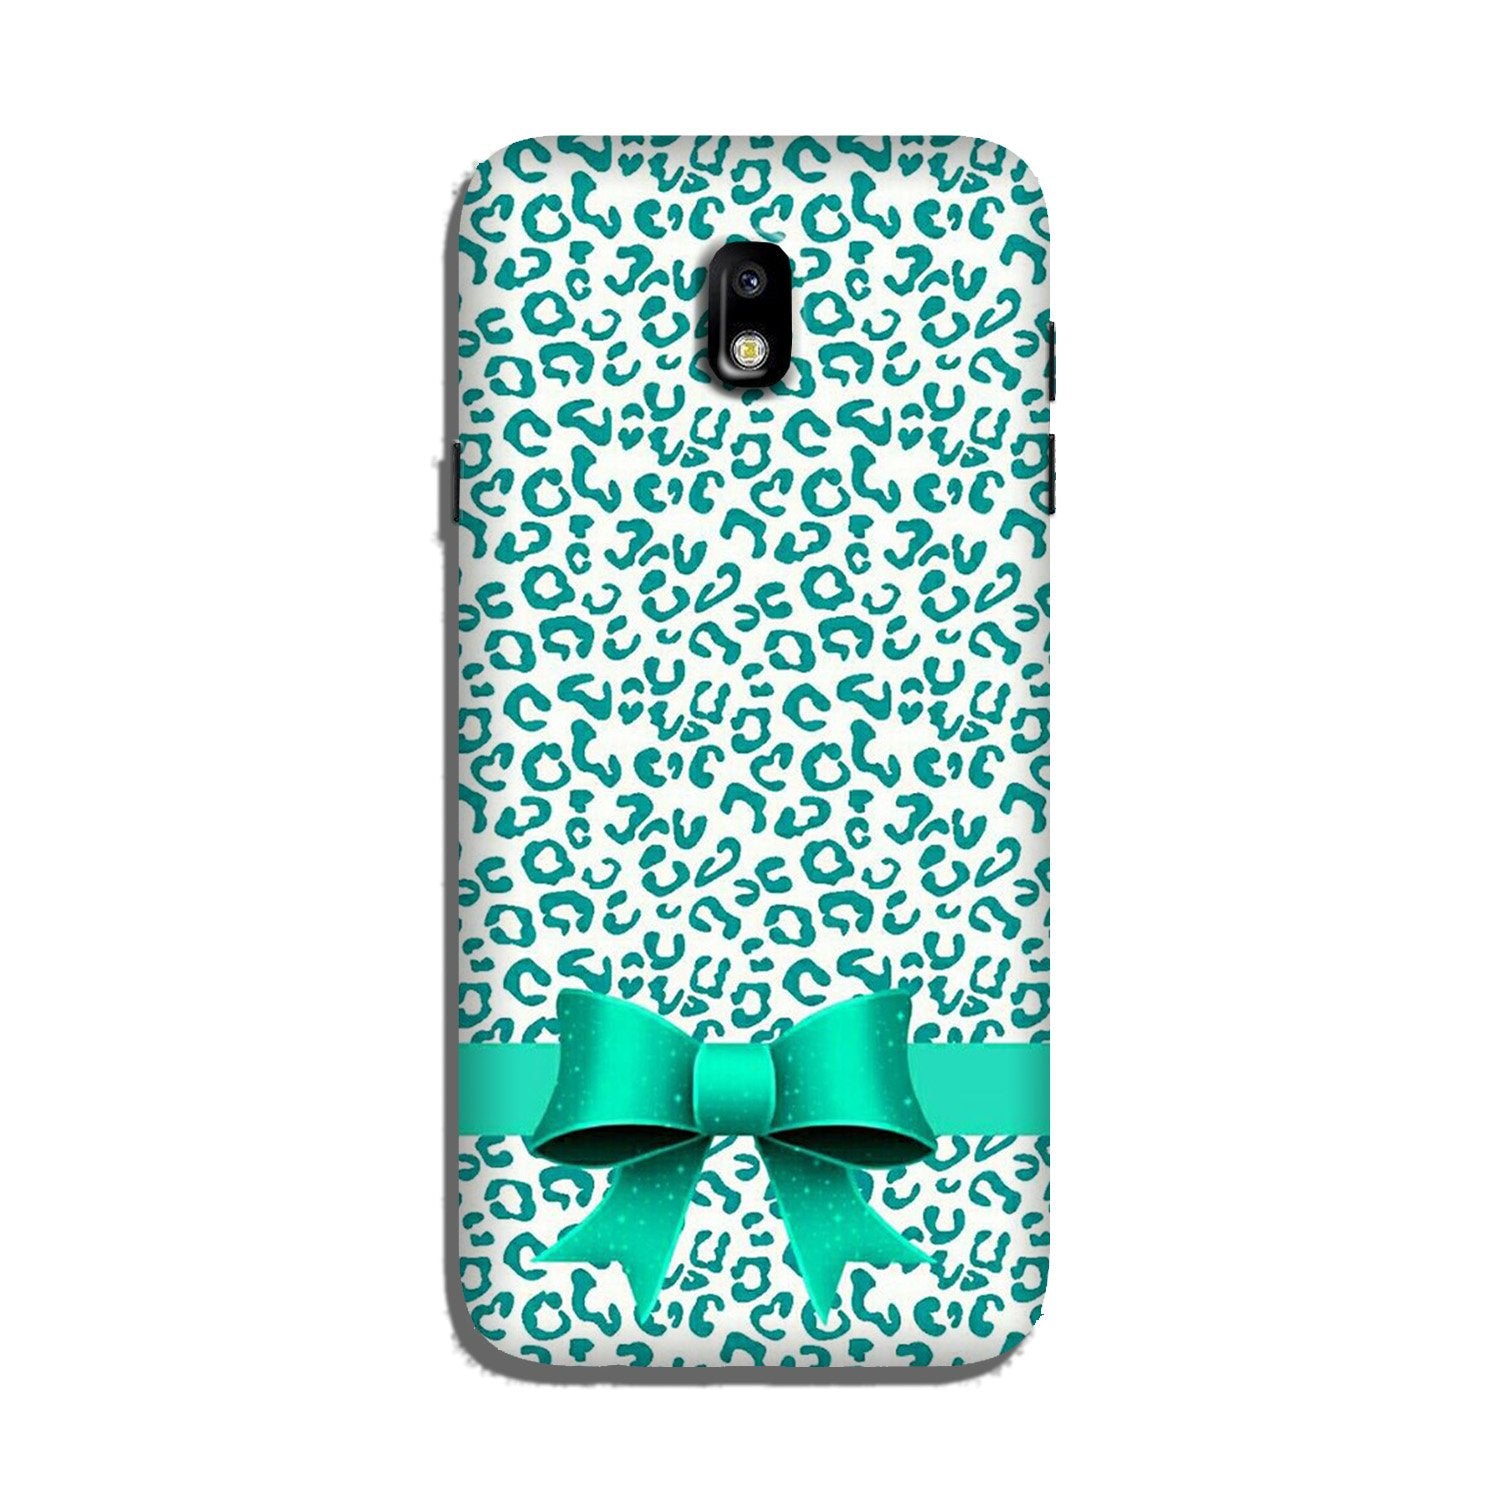 Gift Wrap6 Case for Galaxy J3 Pro